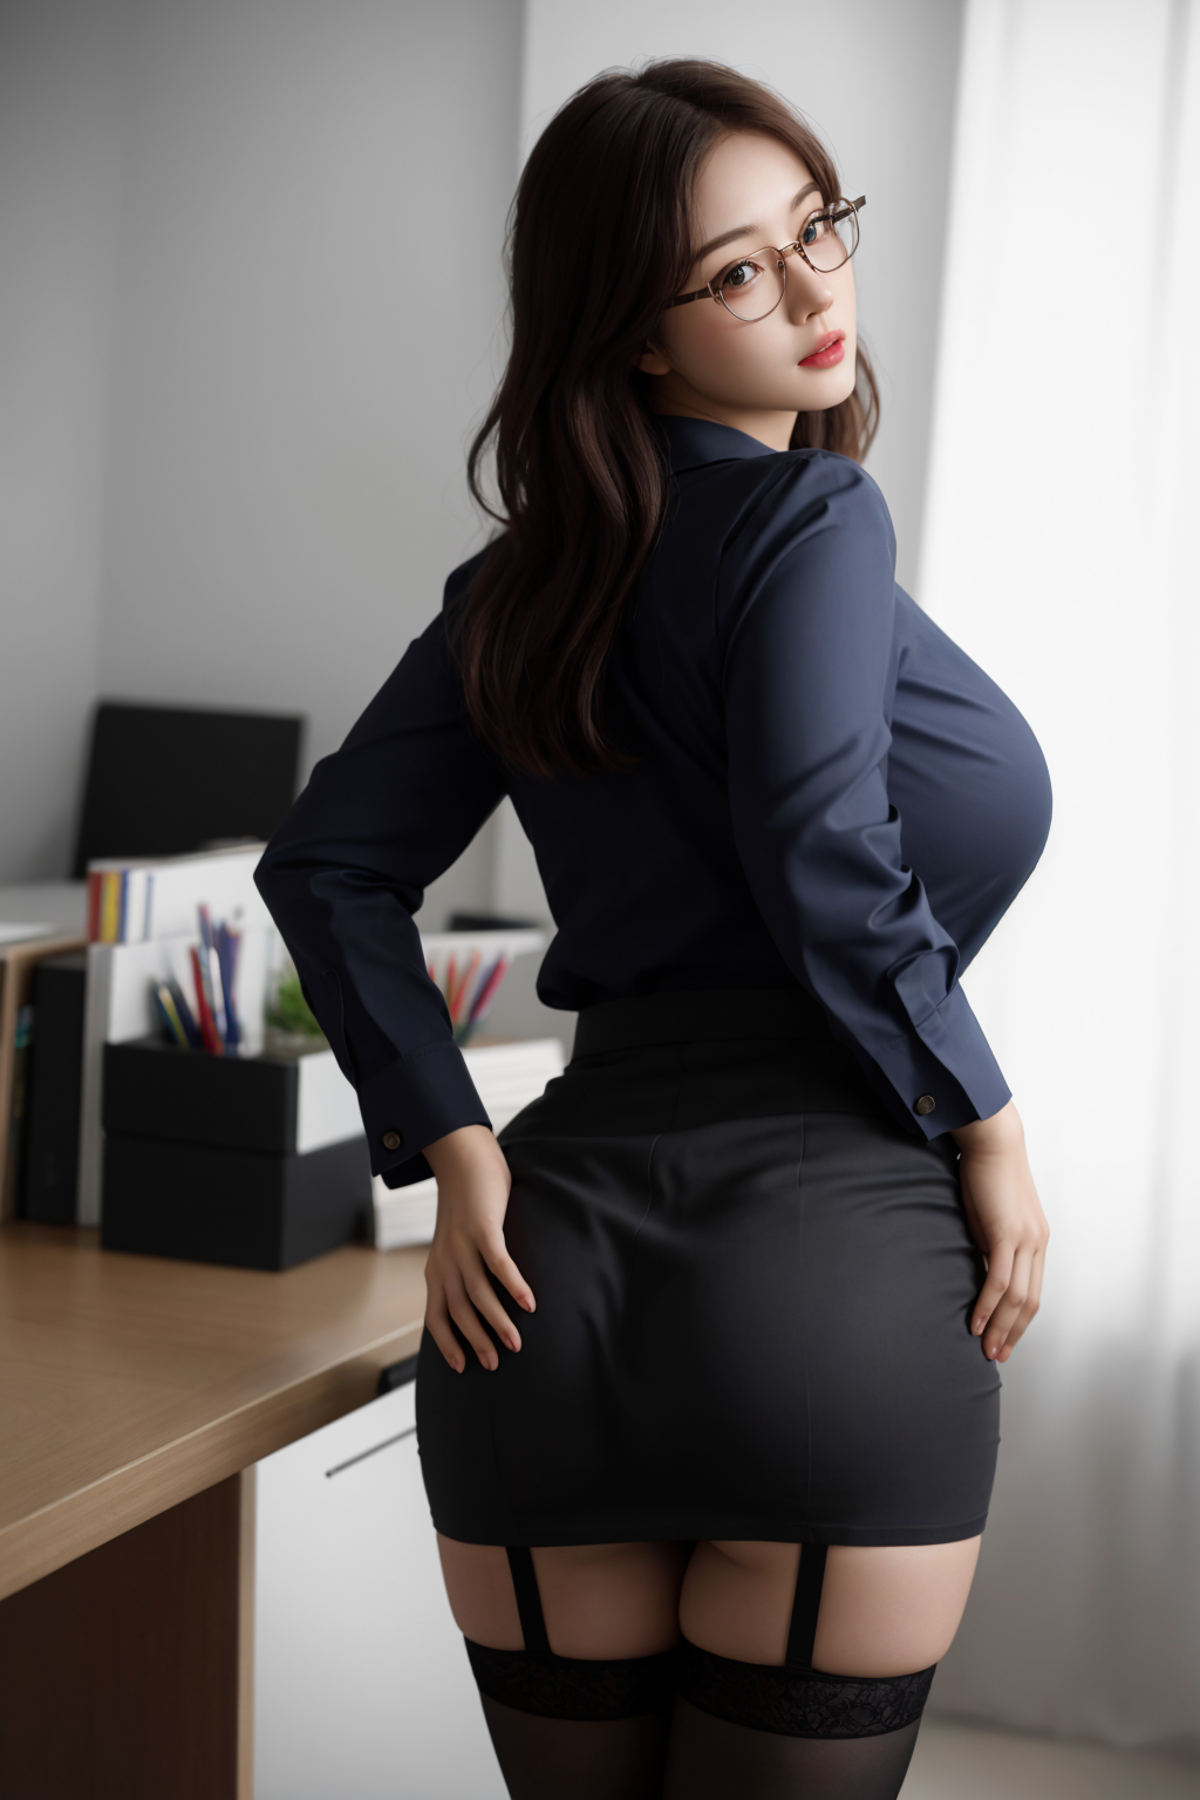 sexy office lady image by Kejolong